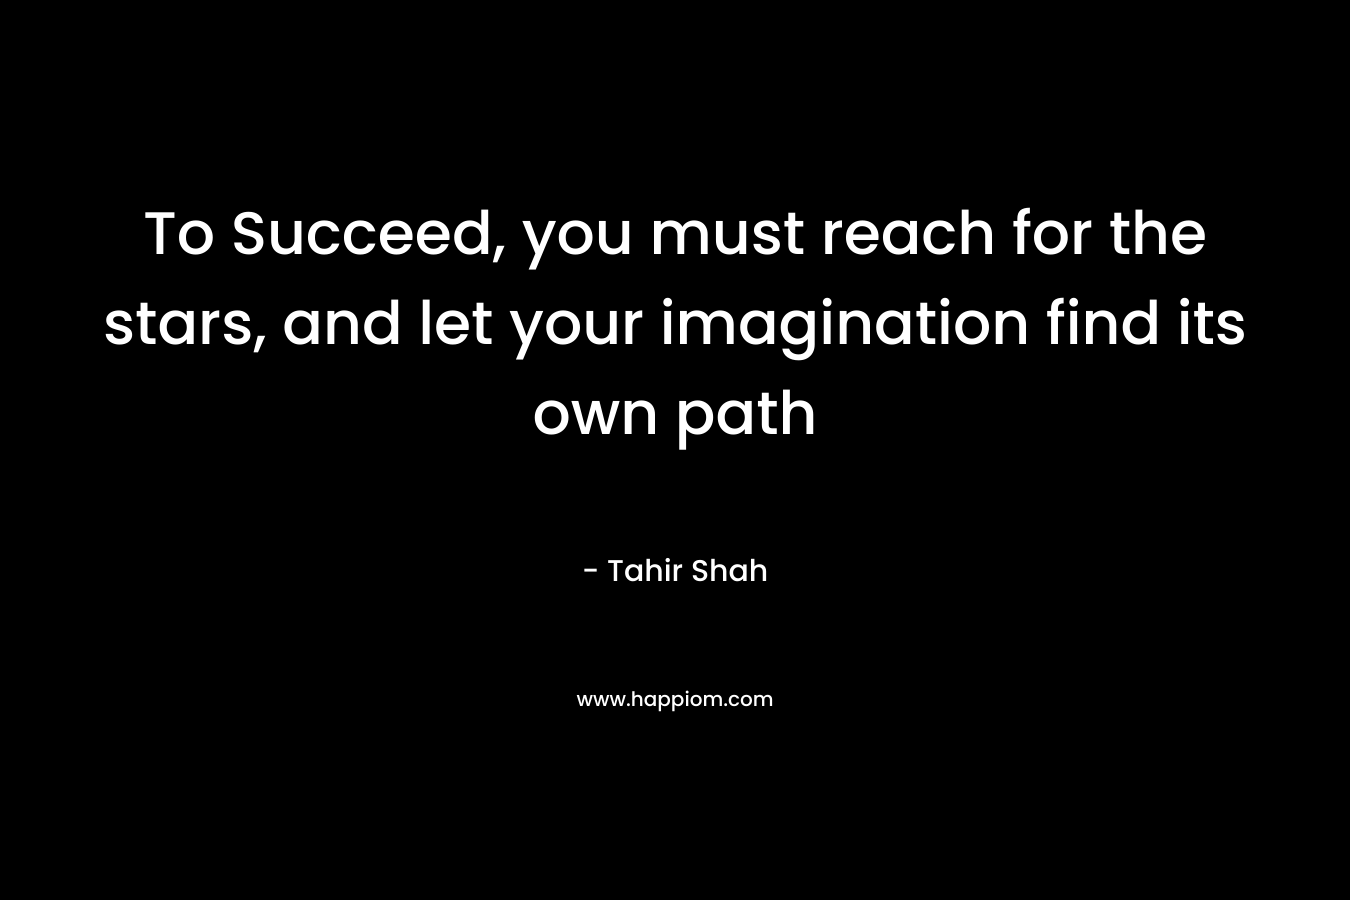 To Succeed, you must reach for the stars, and let your imagination find its own path – Tahir Shah